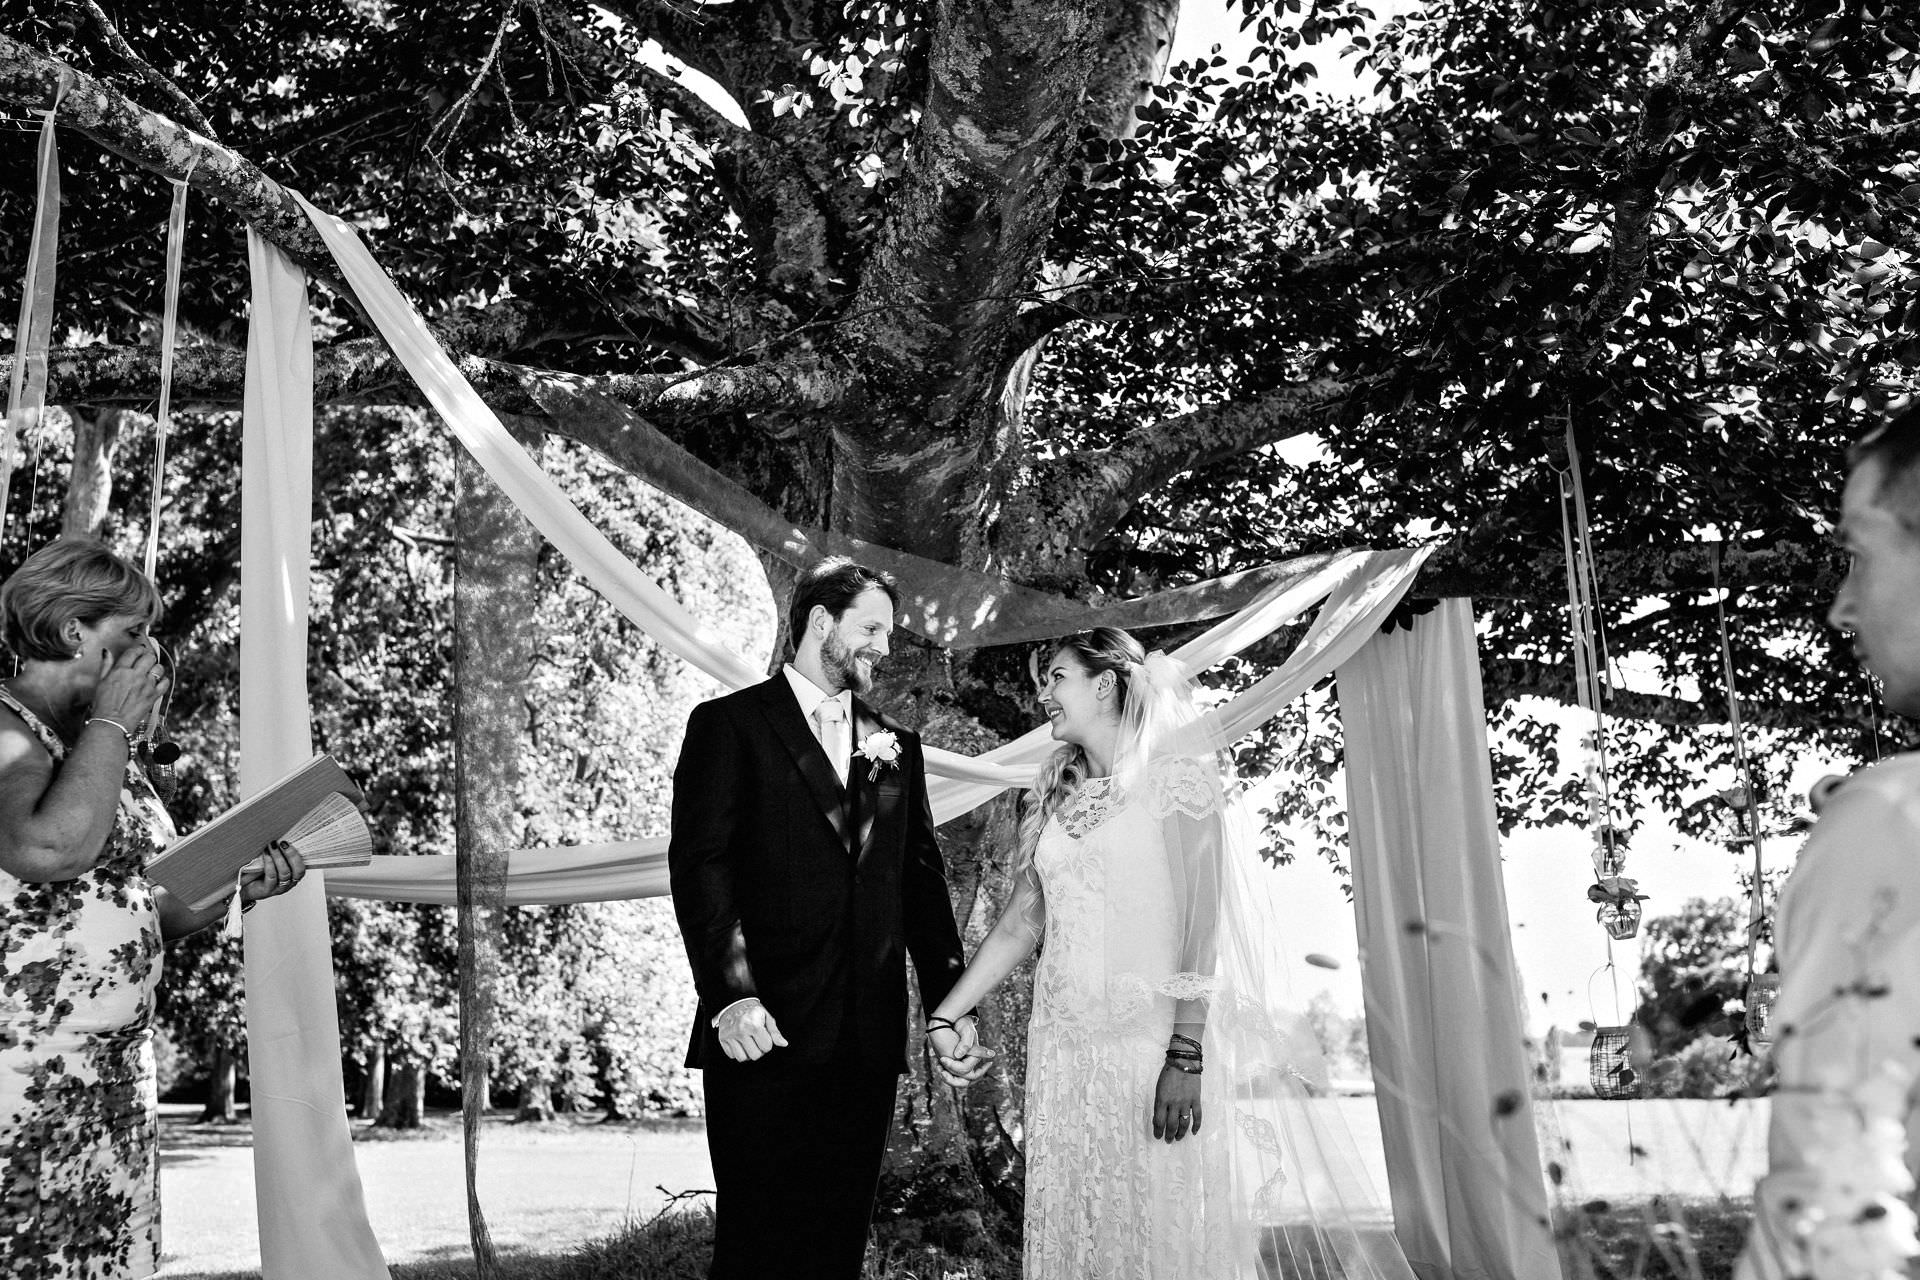 humanist wedding by the tree